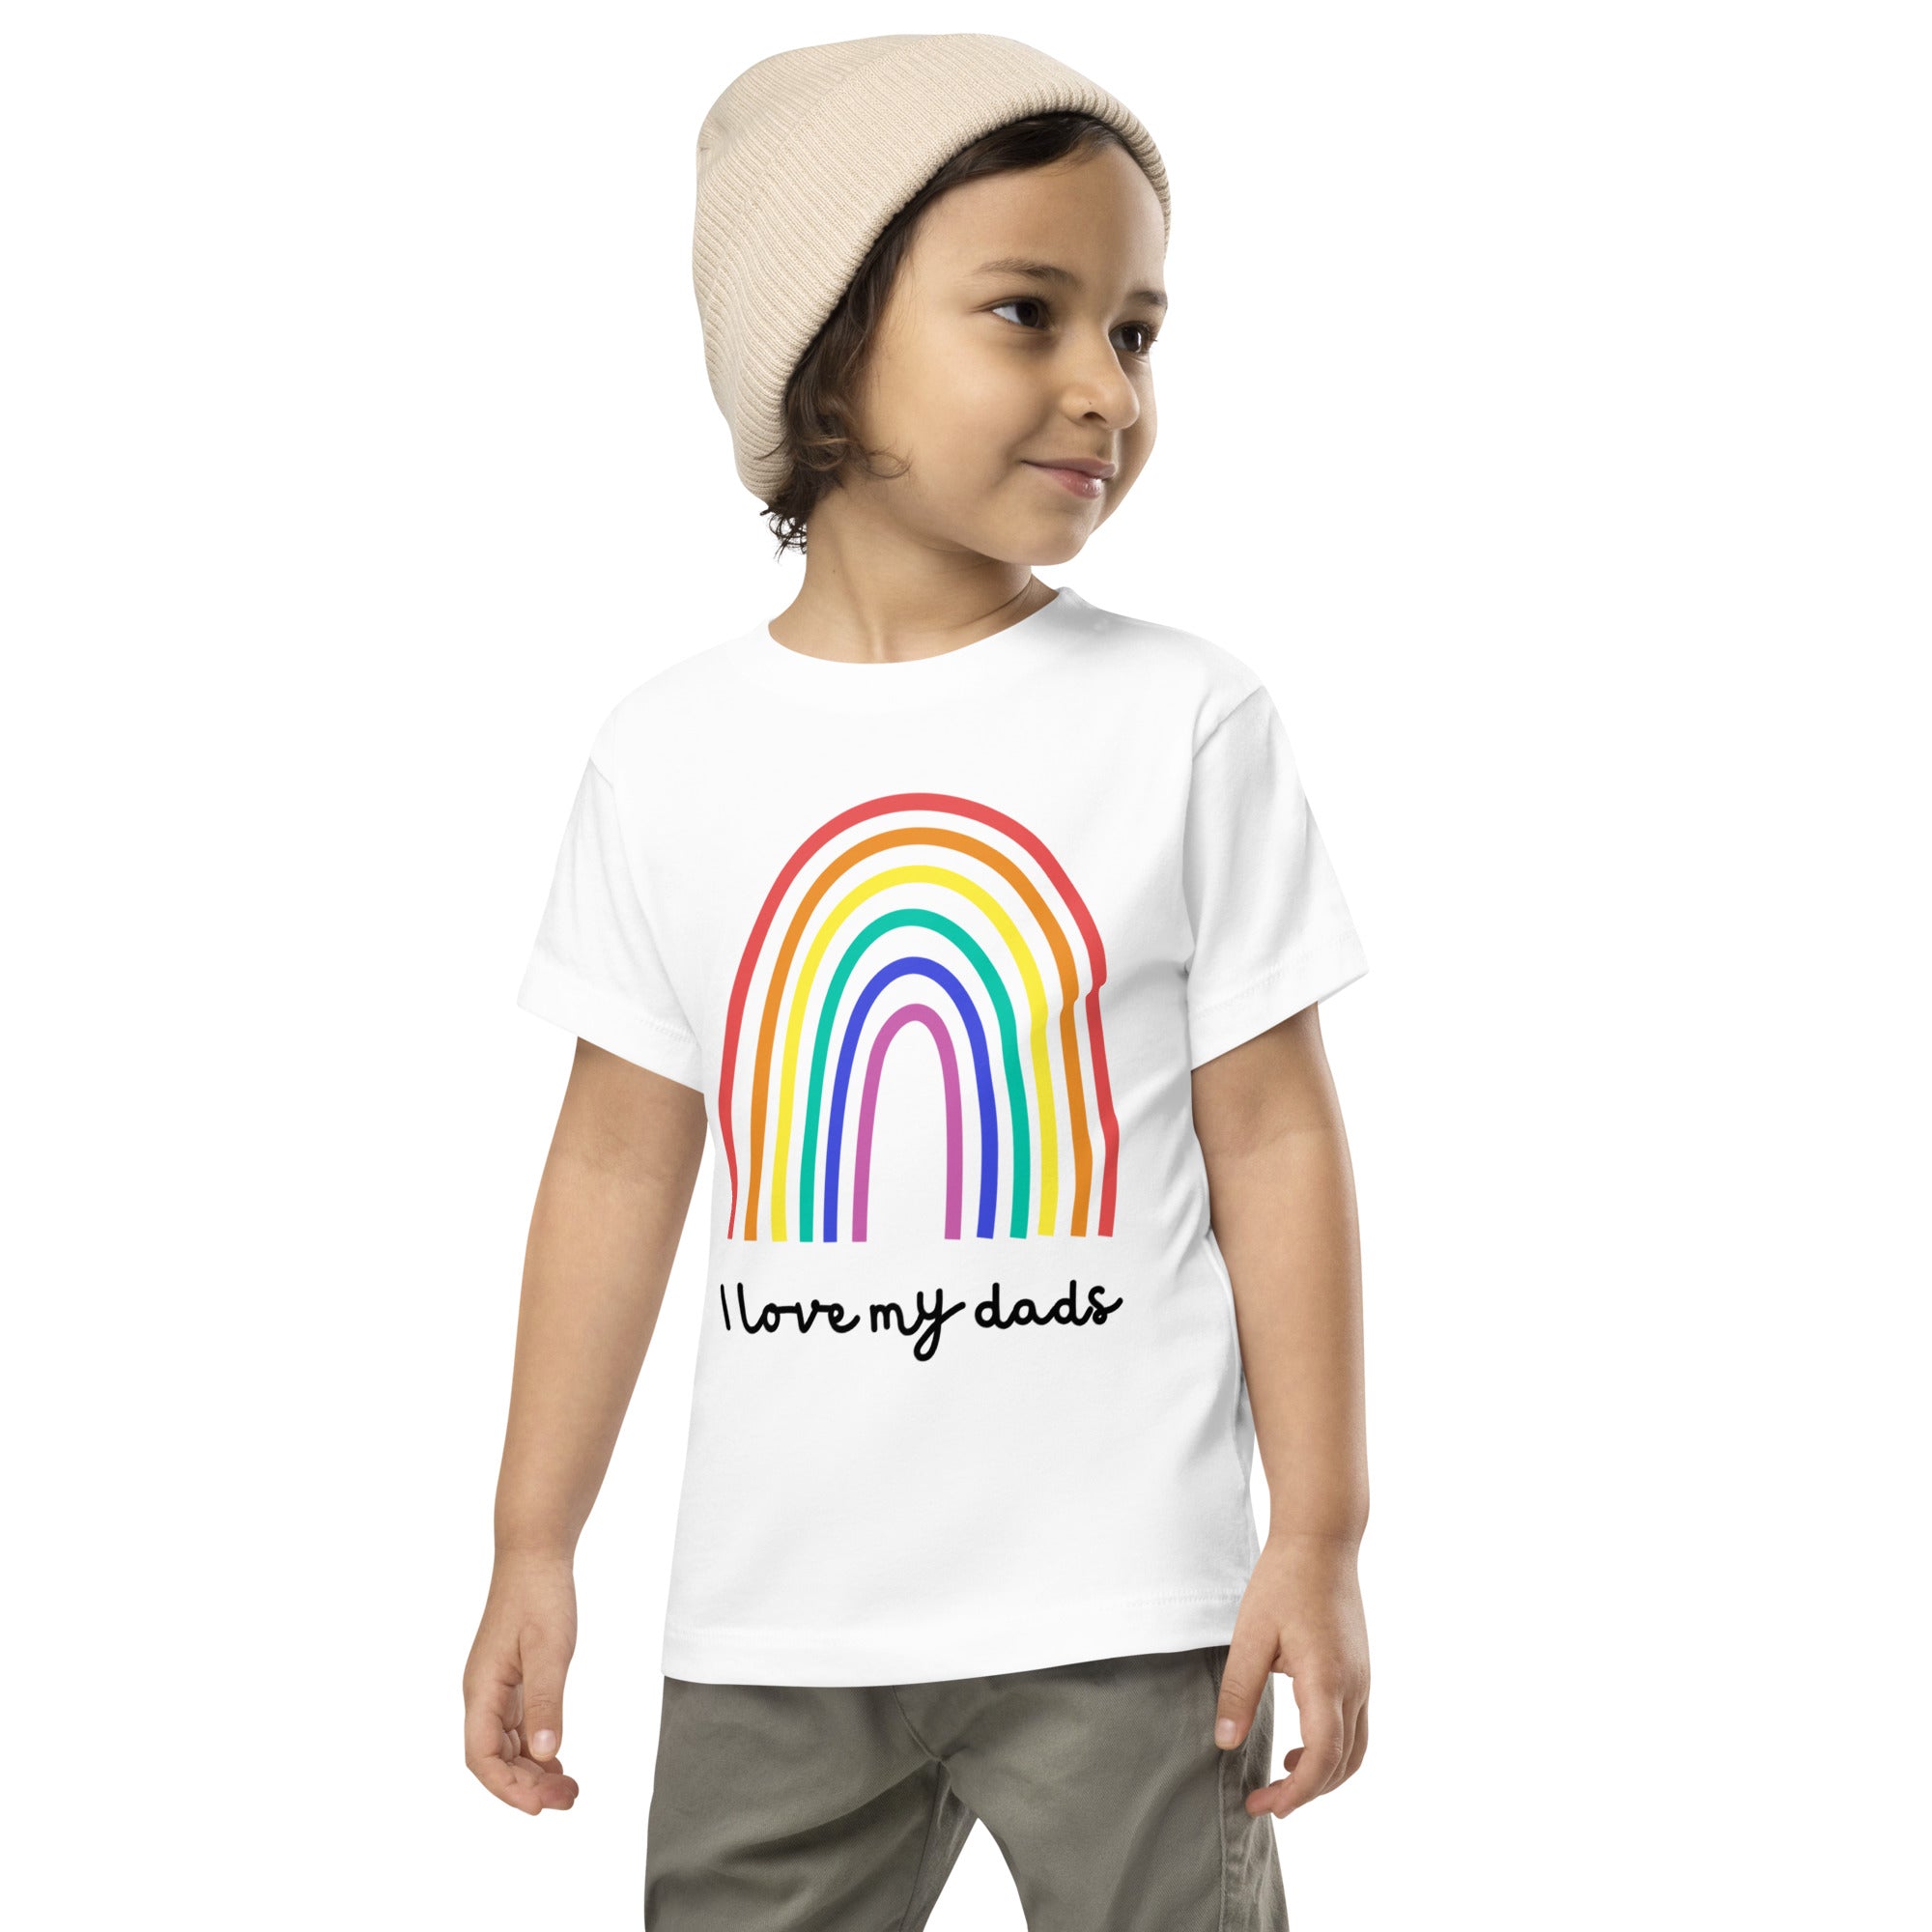 I Love My Dads - Toddler Short Sleeve Tee